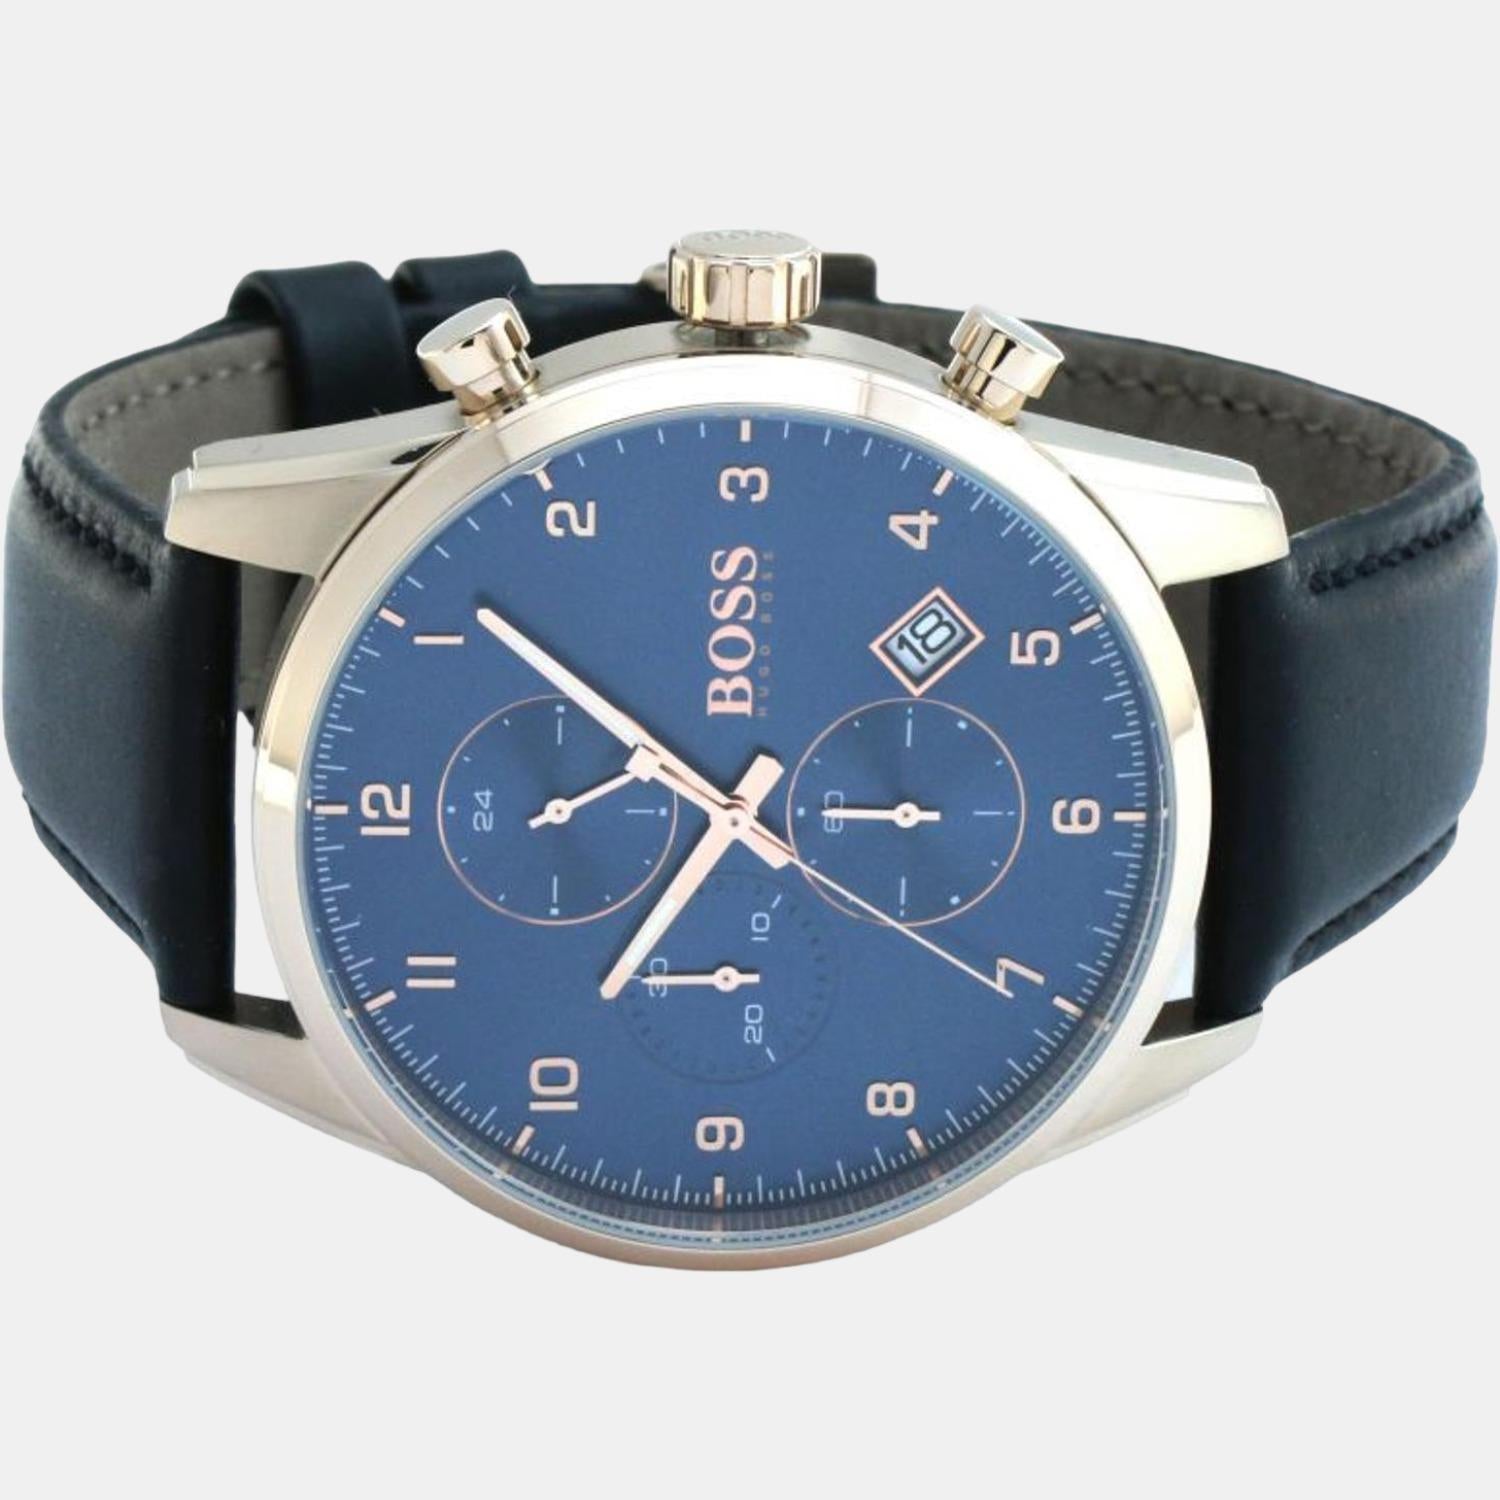 Boss Male Blue | Time Boss Just – In Analog Watch Leather